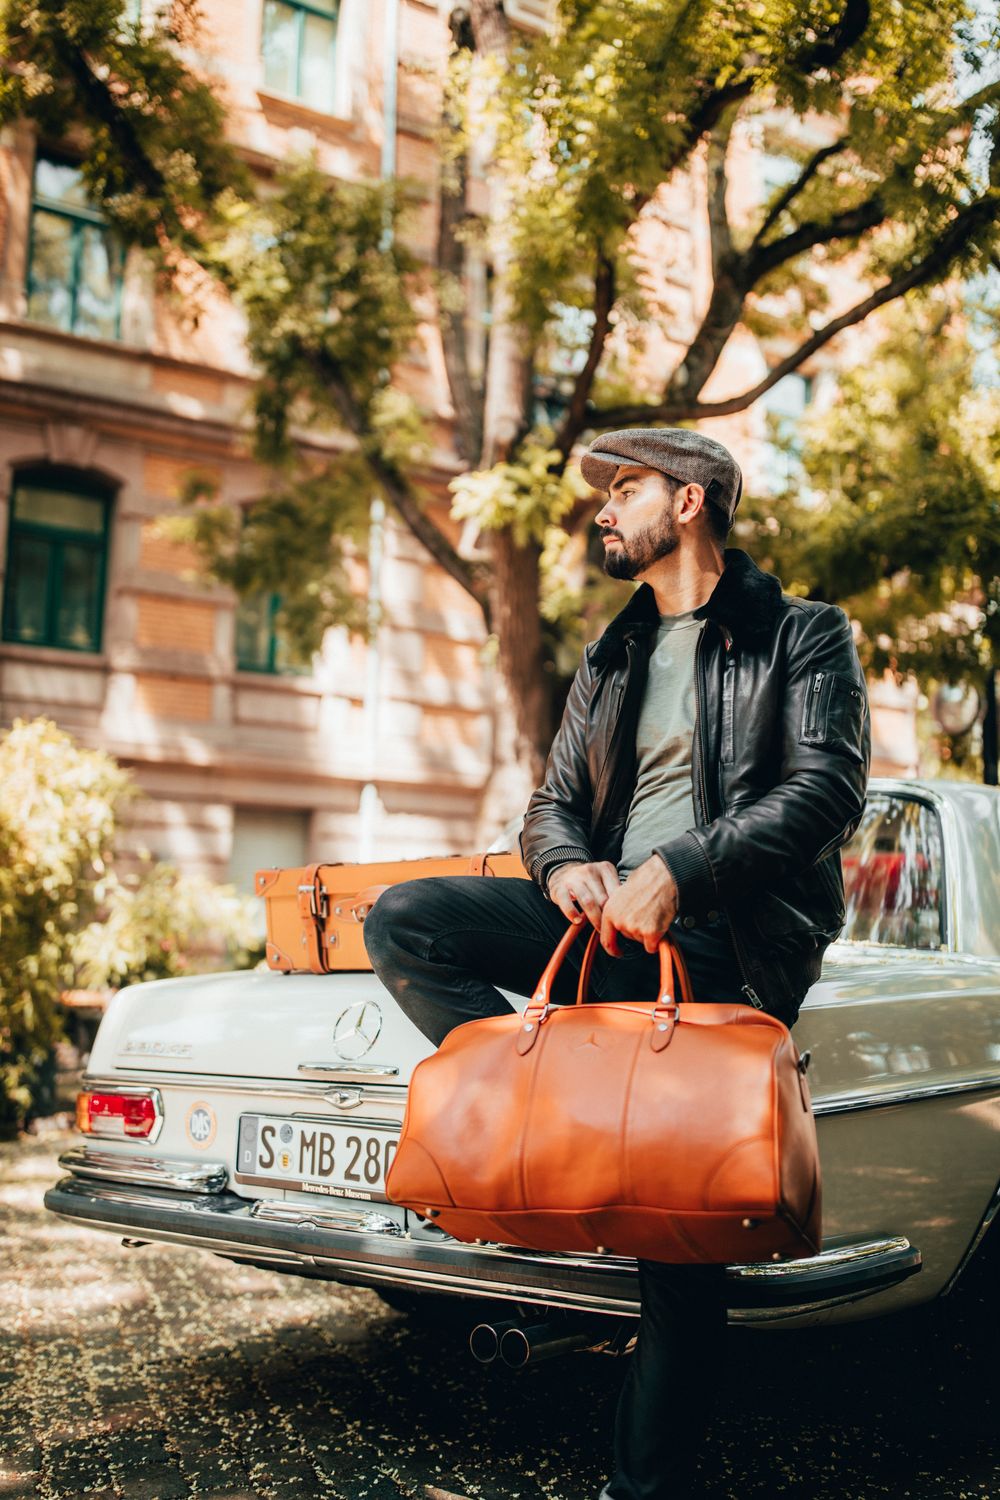 Mercedes-Benz Museum on X: To all you travellers out there! Time to style  up your journey - NOW. Check out the leather weekender and suitcase in our  shop, and choose a cool